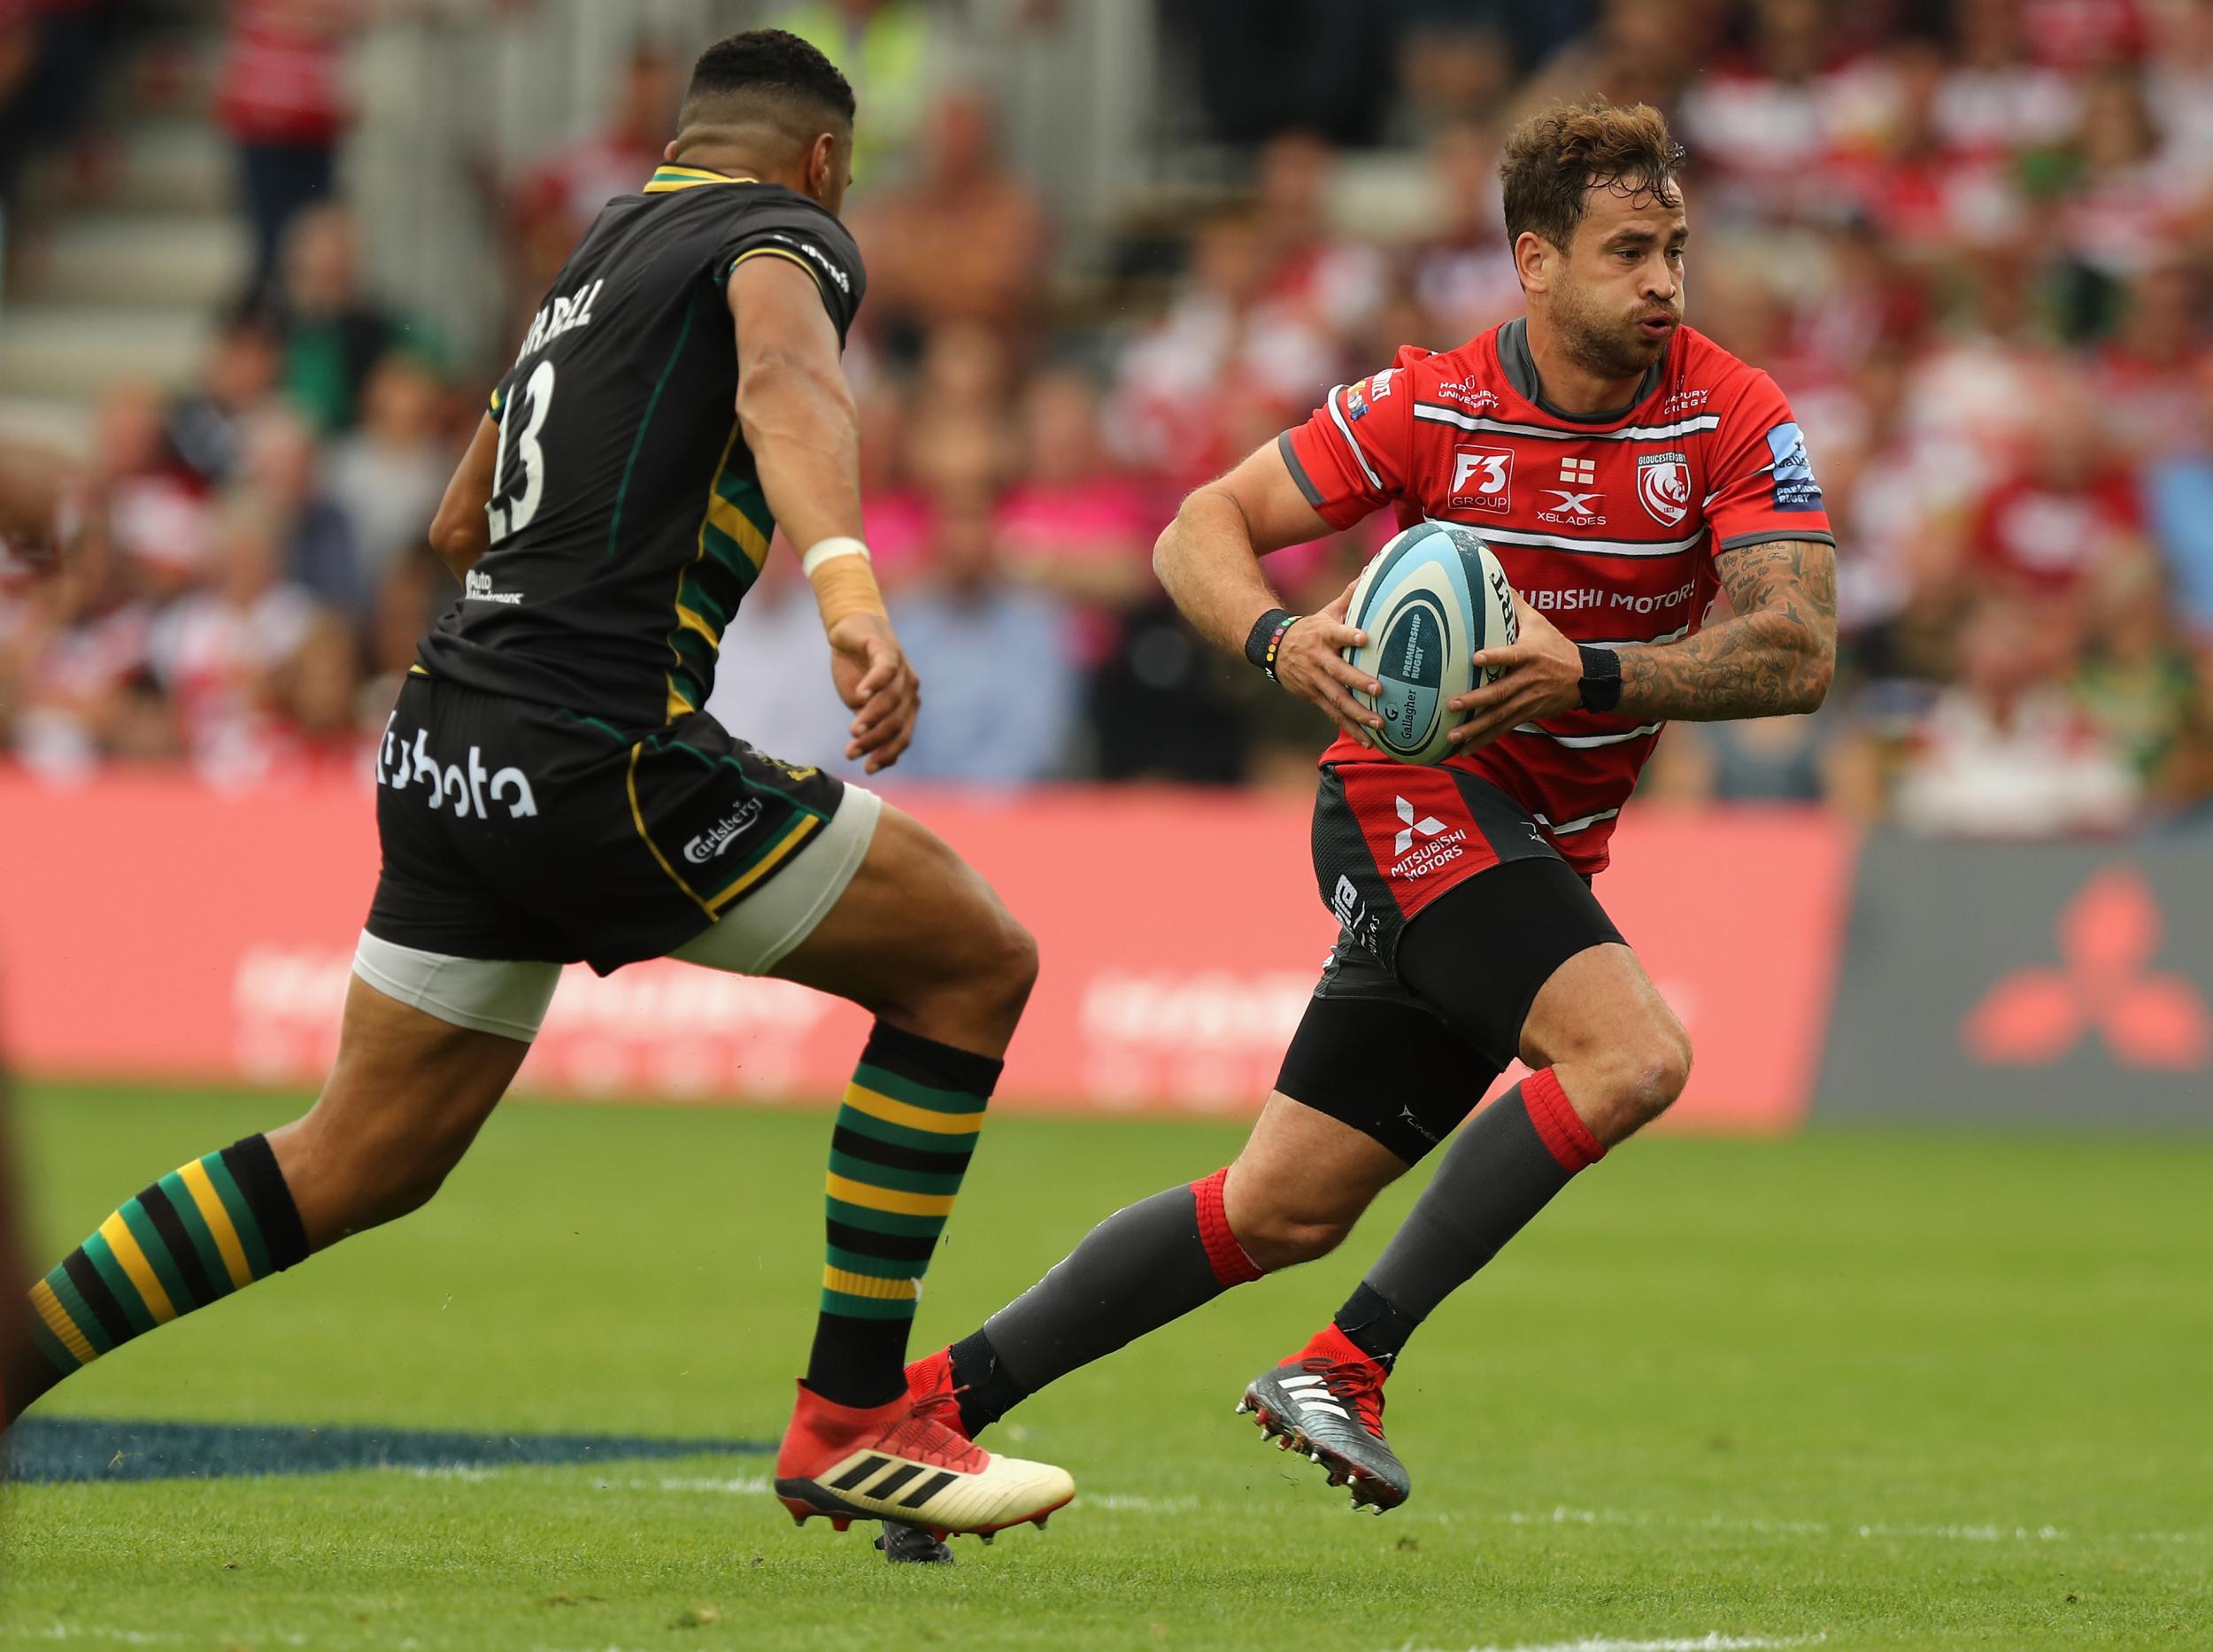 Cipriani masterminded victory on his Gloucester debut